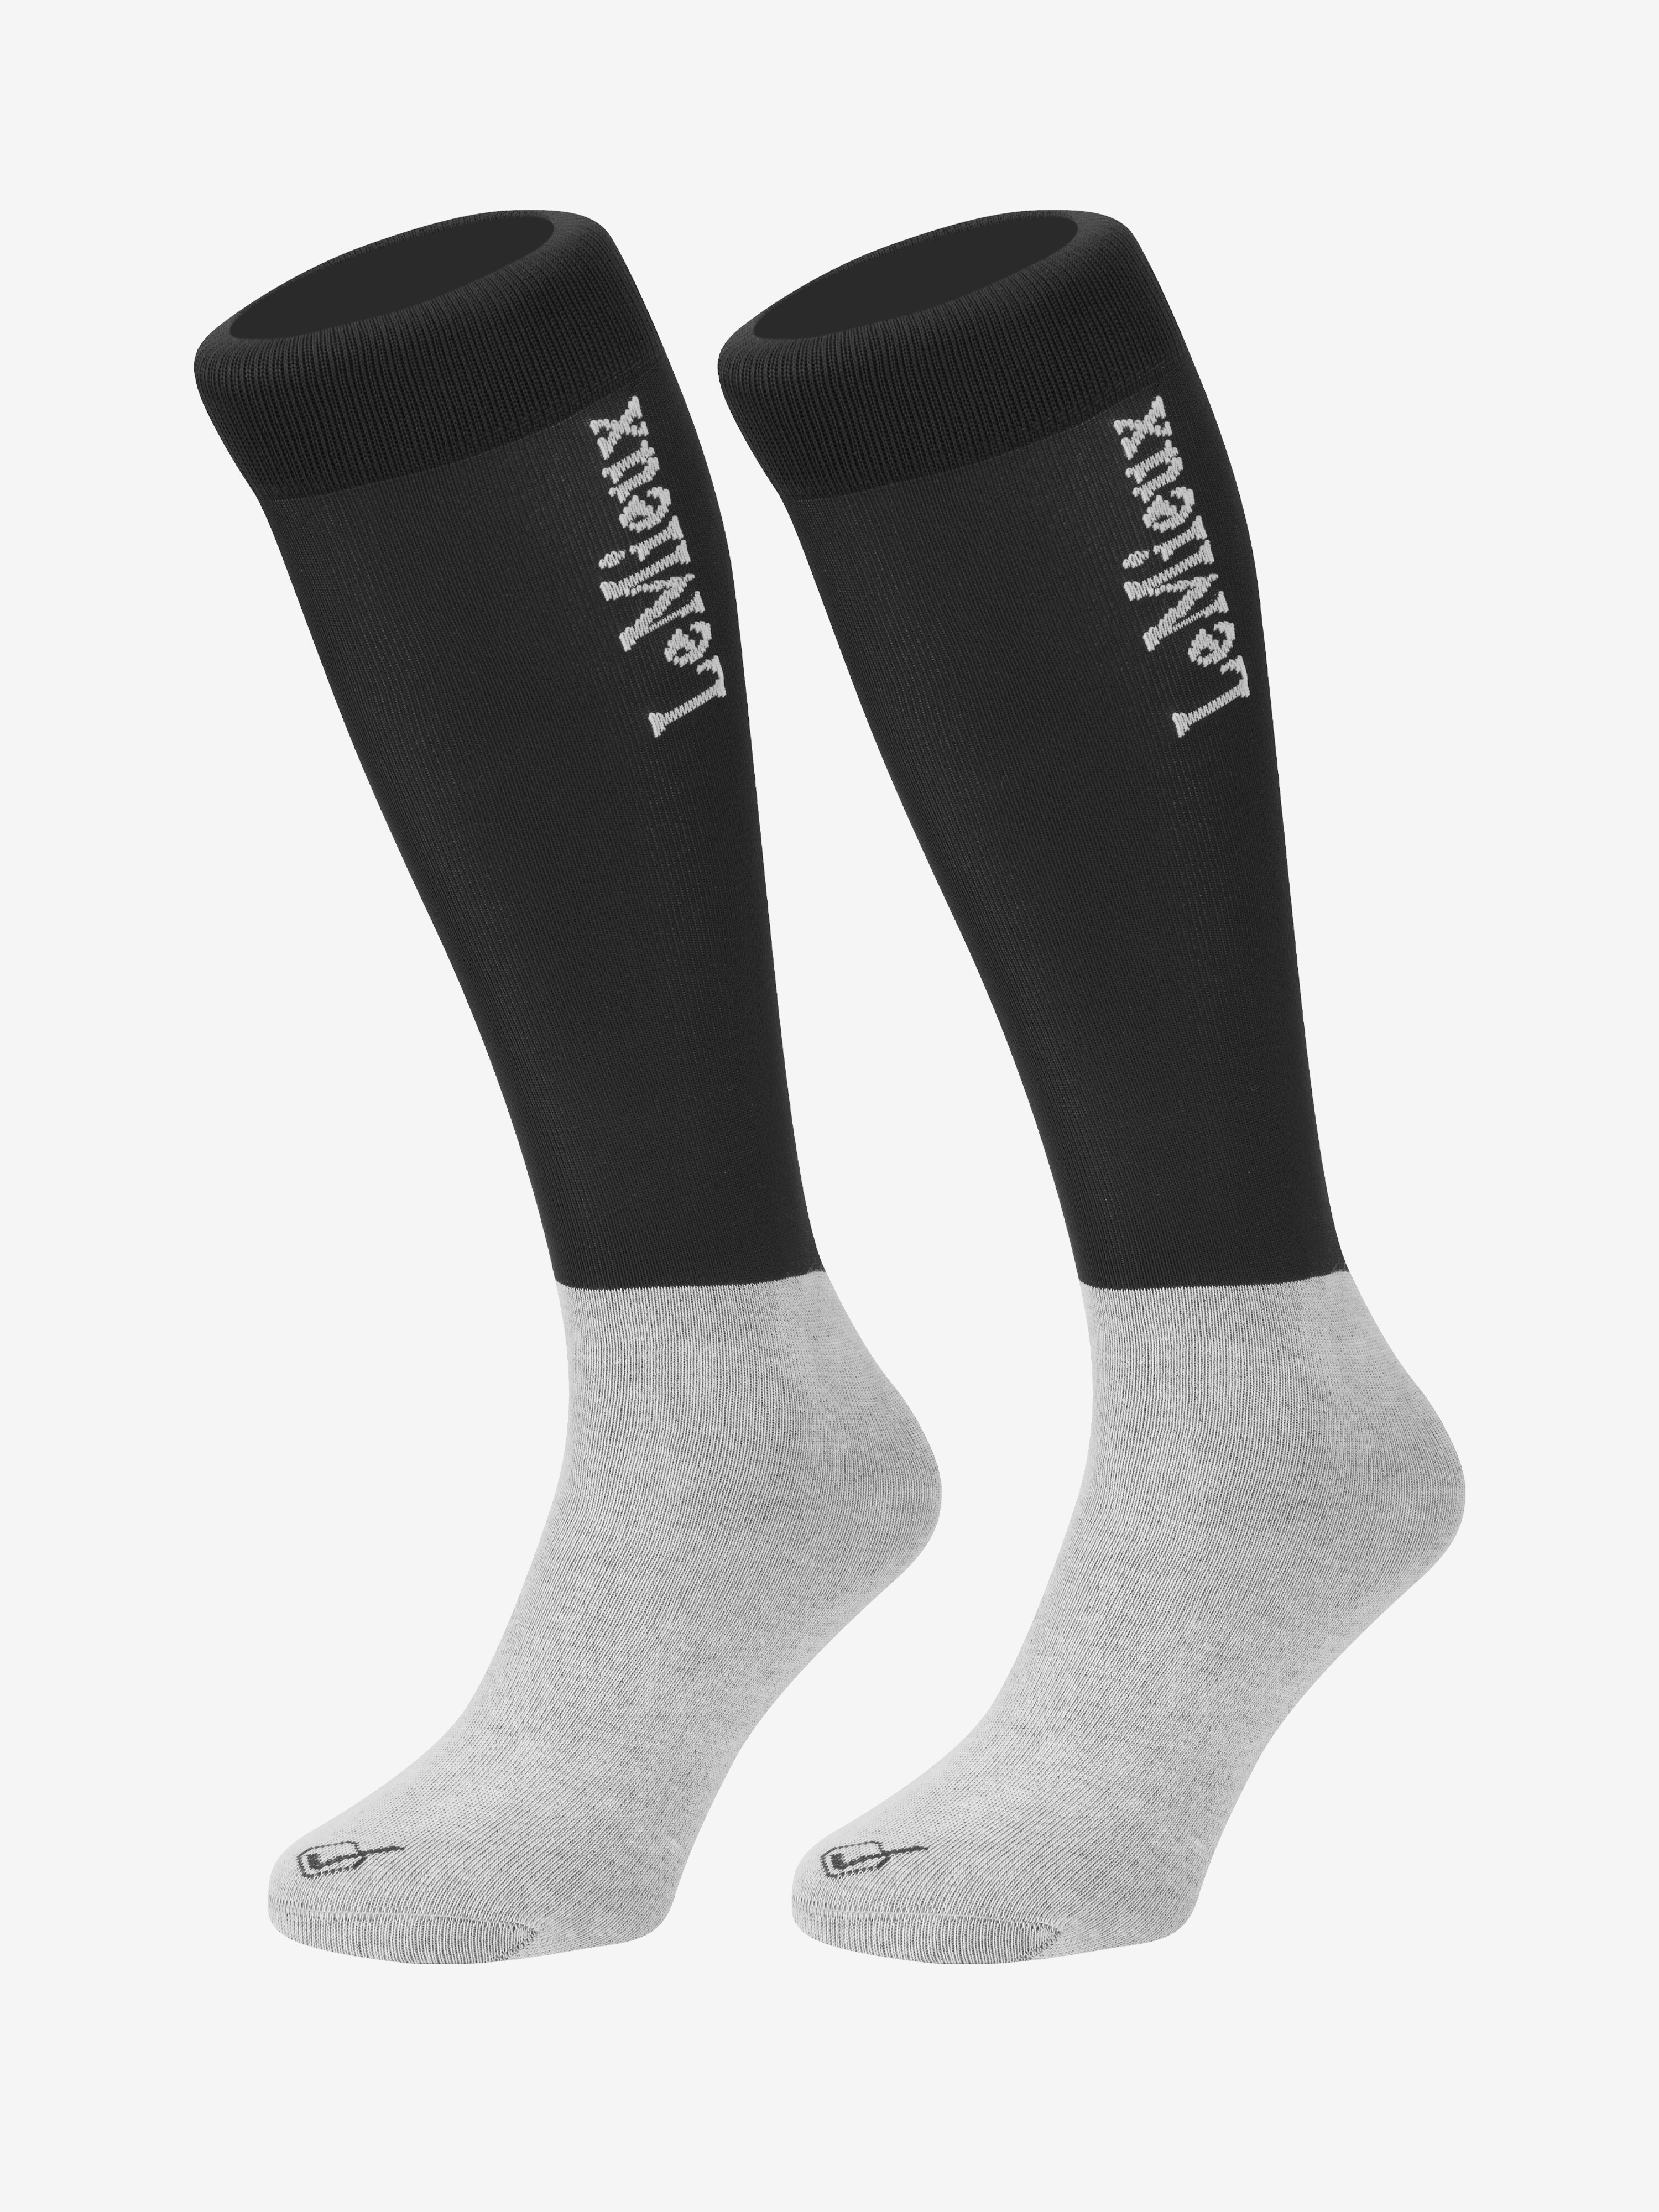 Competition Socks Black (Twin Pack) Clothing